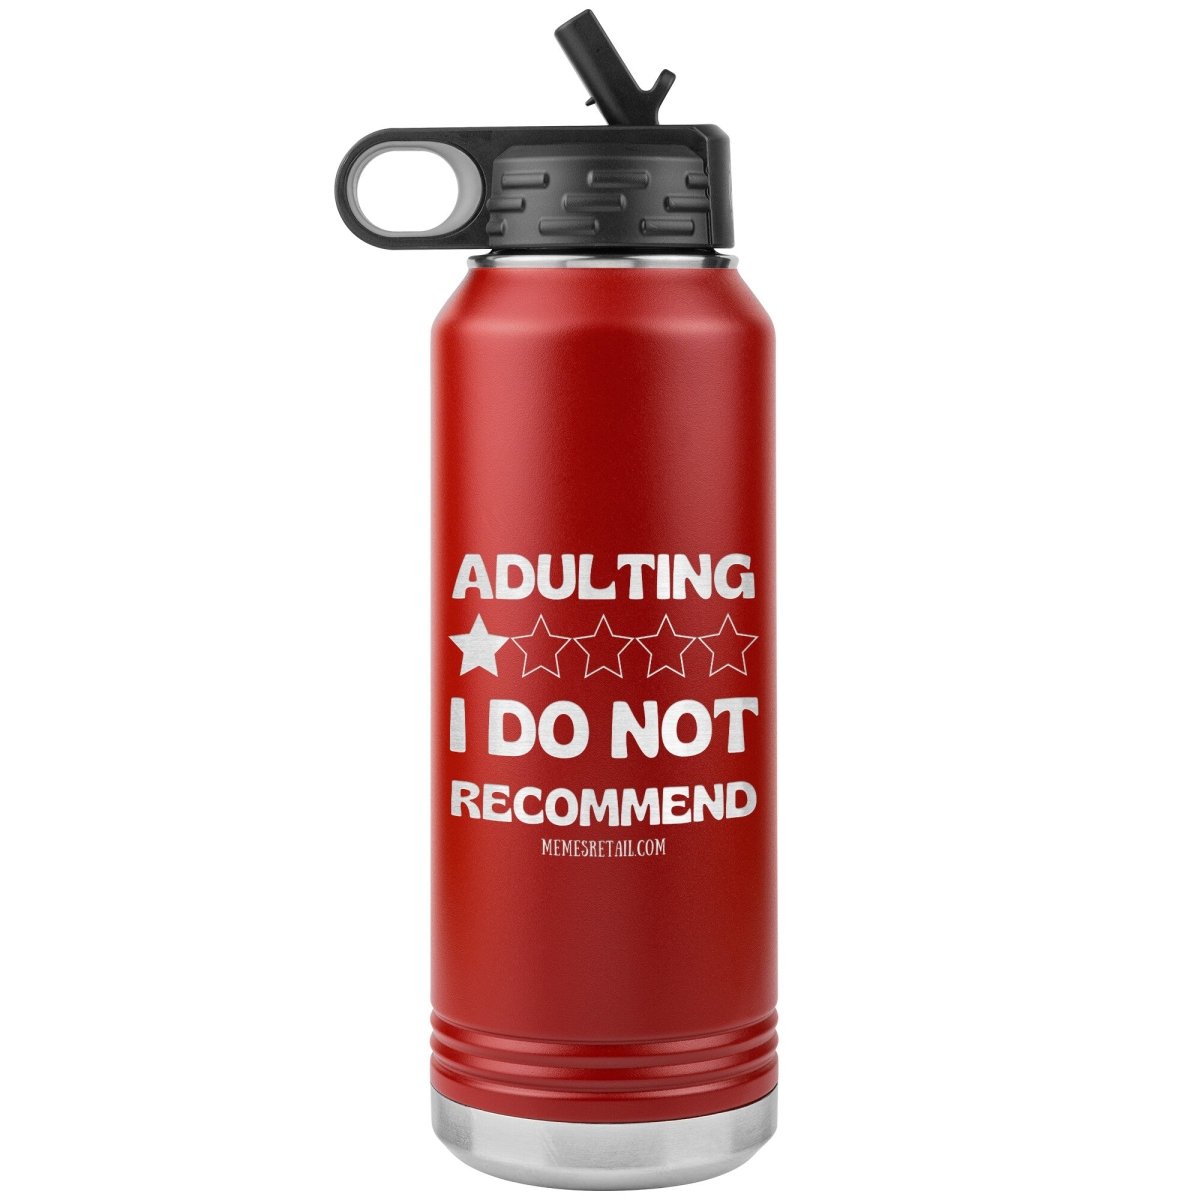 Adulting, 1 Star, I do not recommend 32oz Water Tumblers, Red - MemesRetail.com